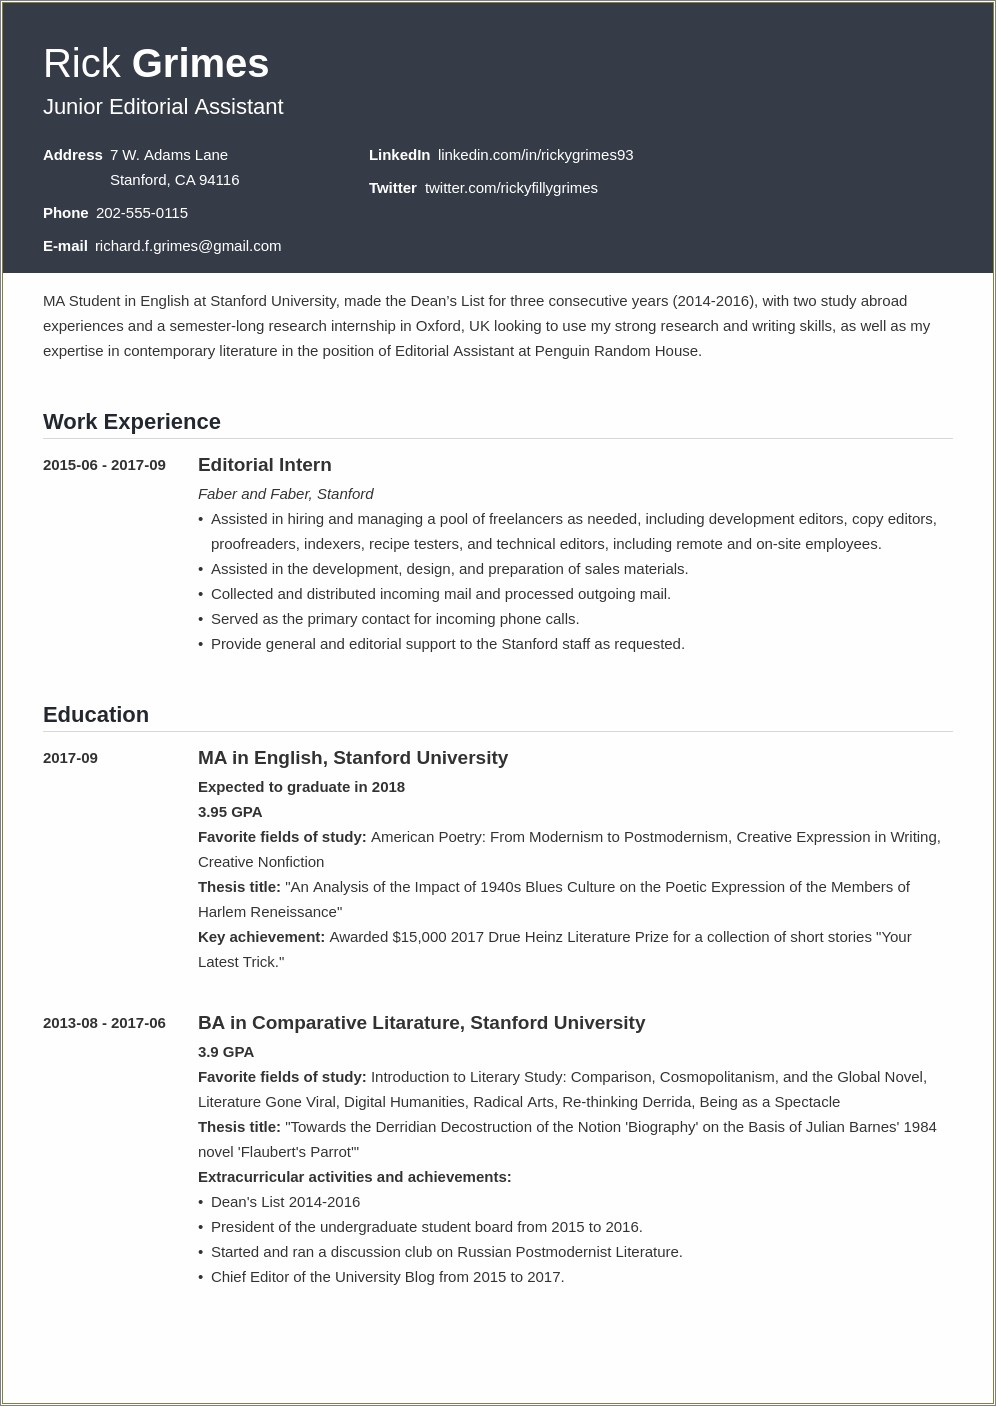 Sample Resume For Applying Work Abroad